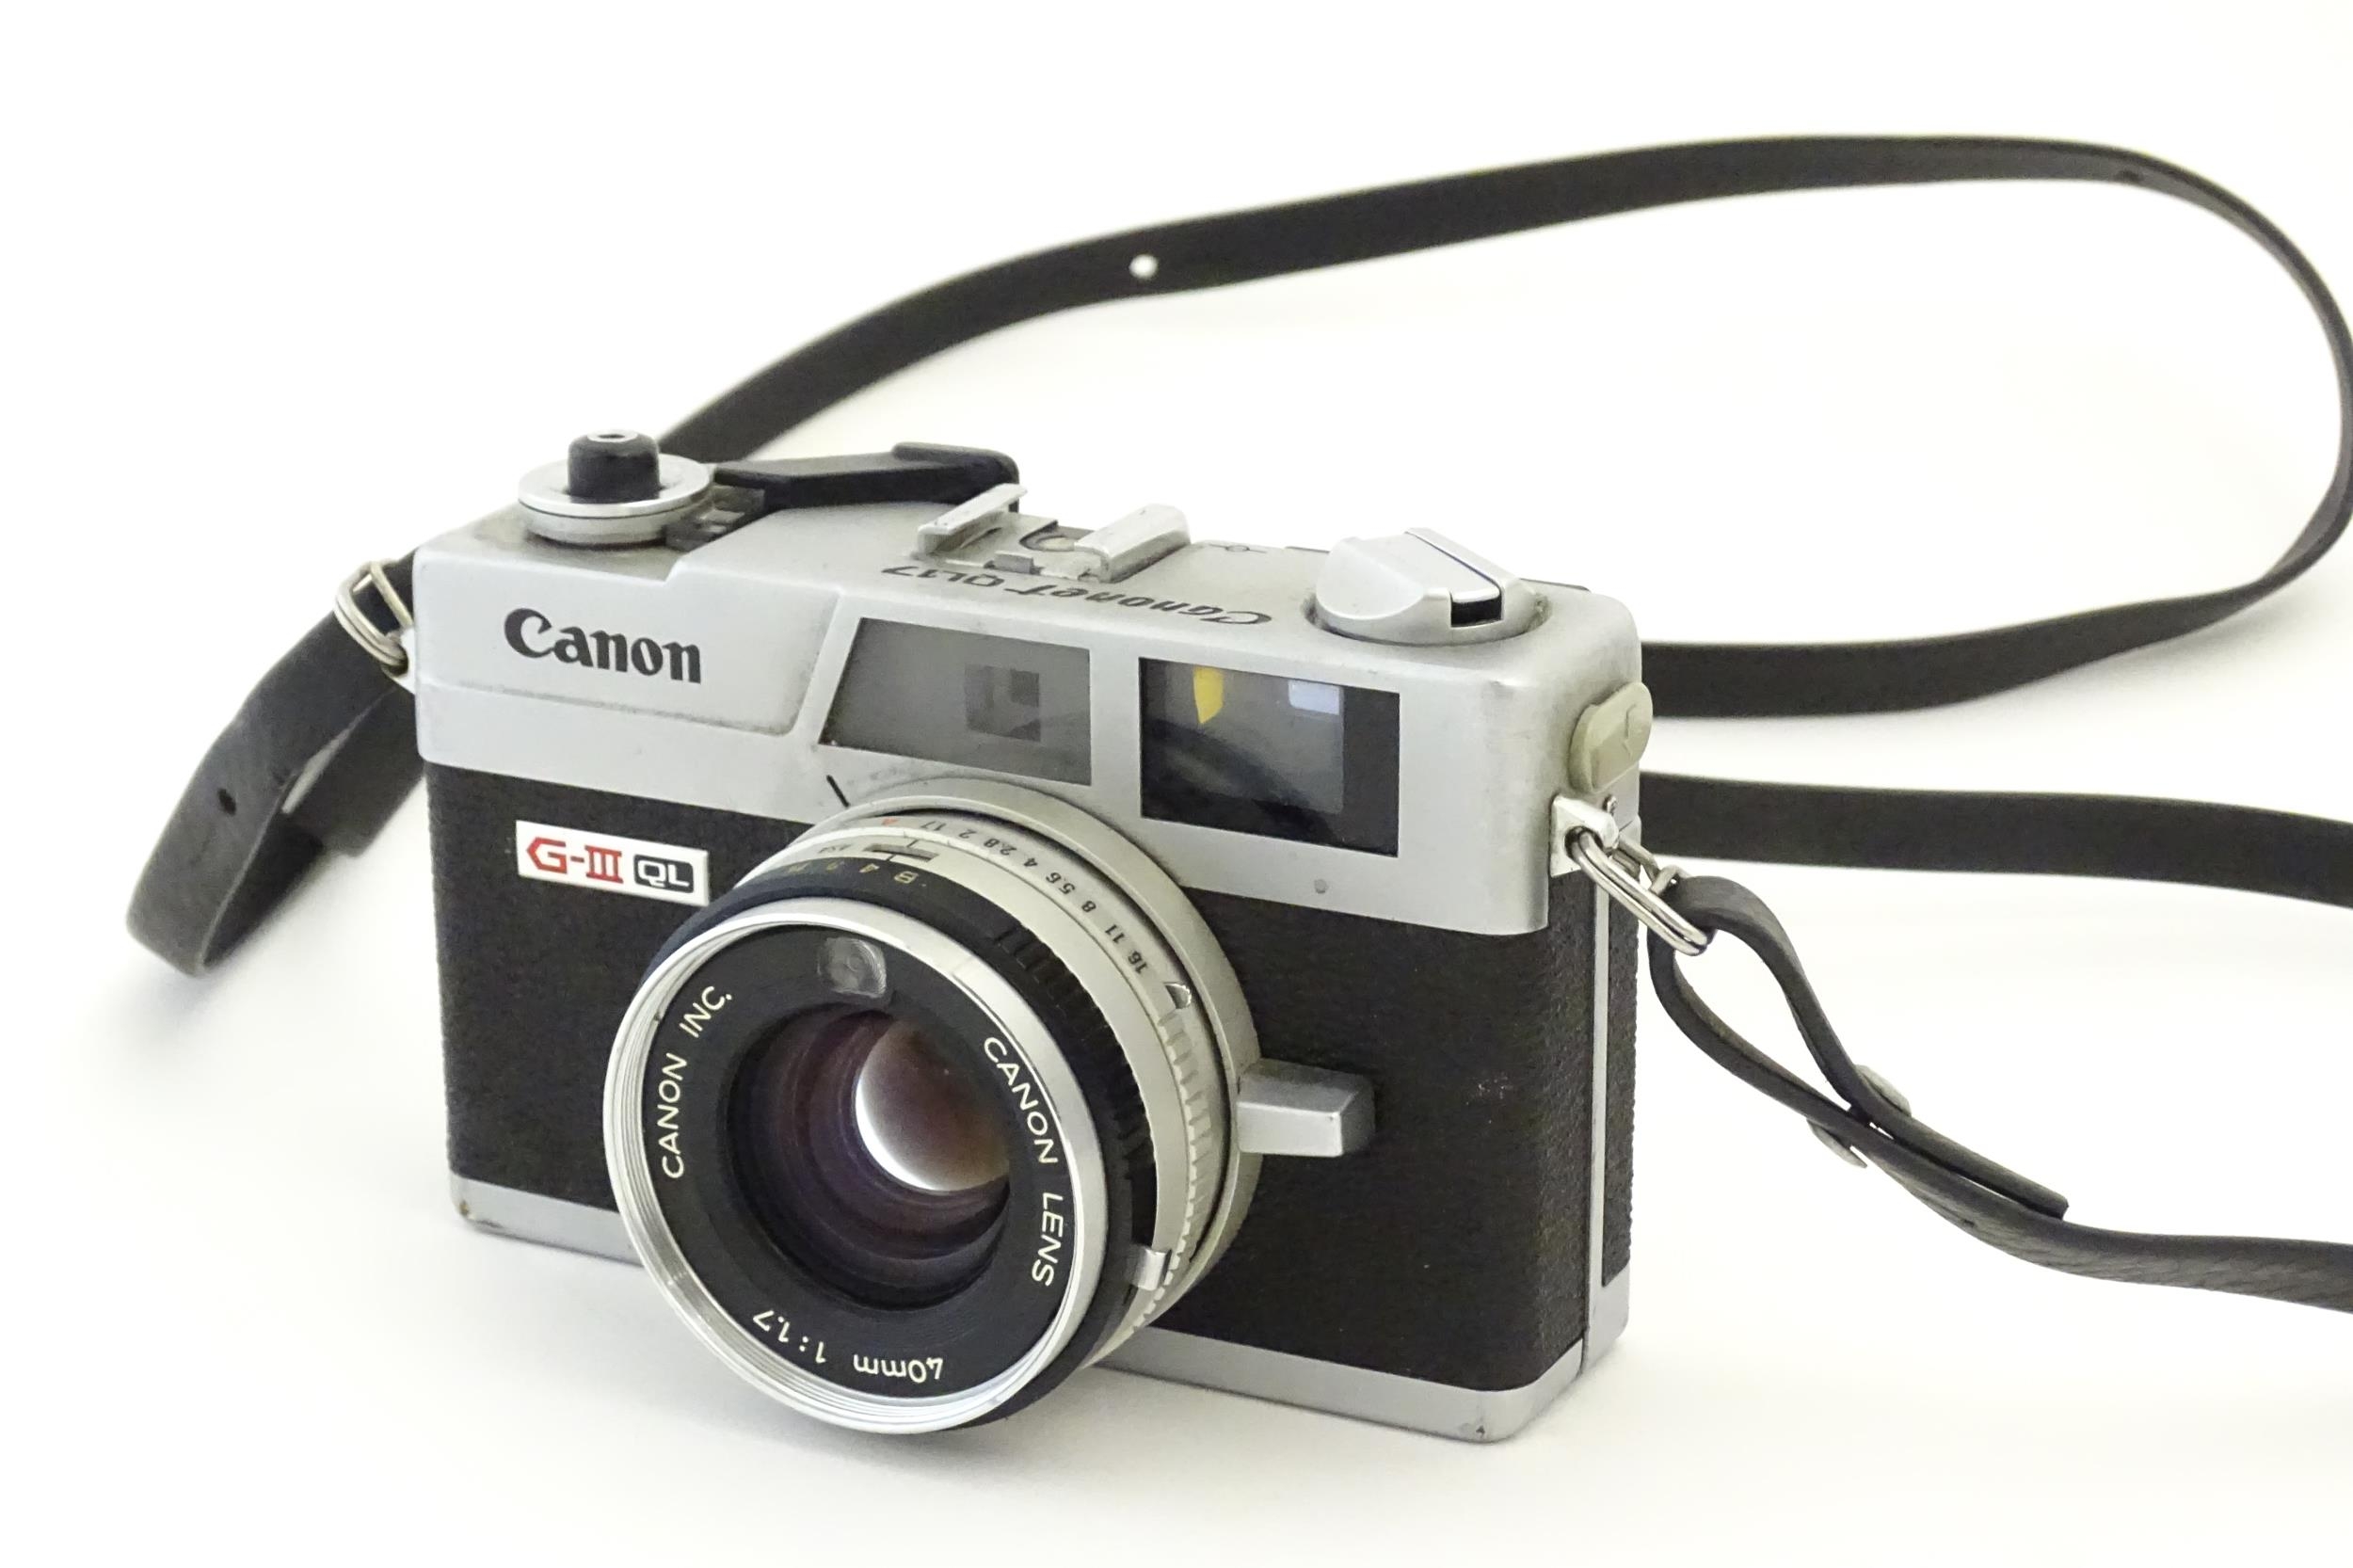 A Canon Canonet G-III QL17 35mm film camera, c1972, cased with lens cap. Approx 4 5/8" wide Please